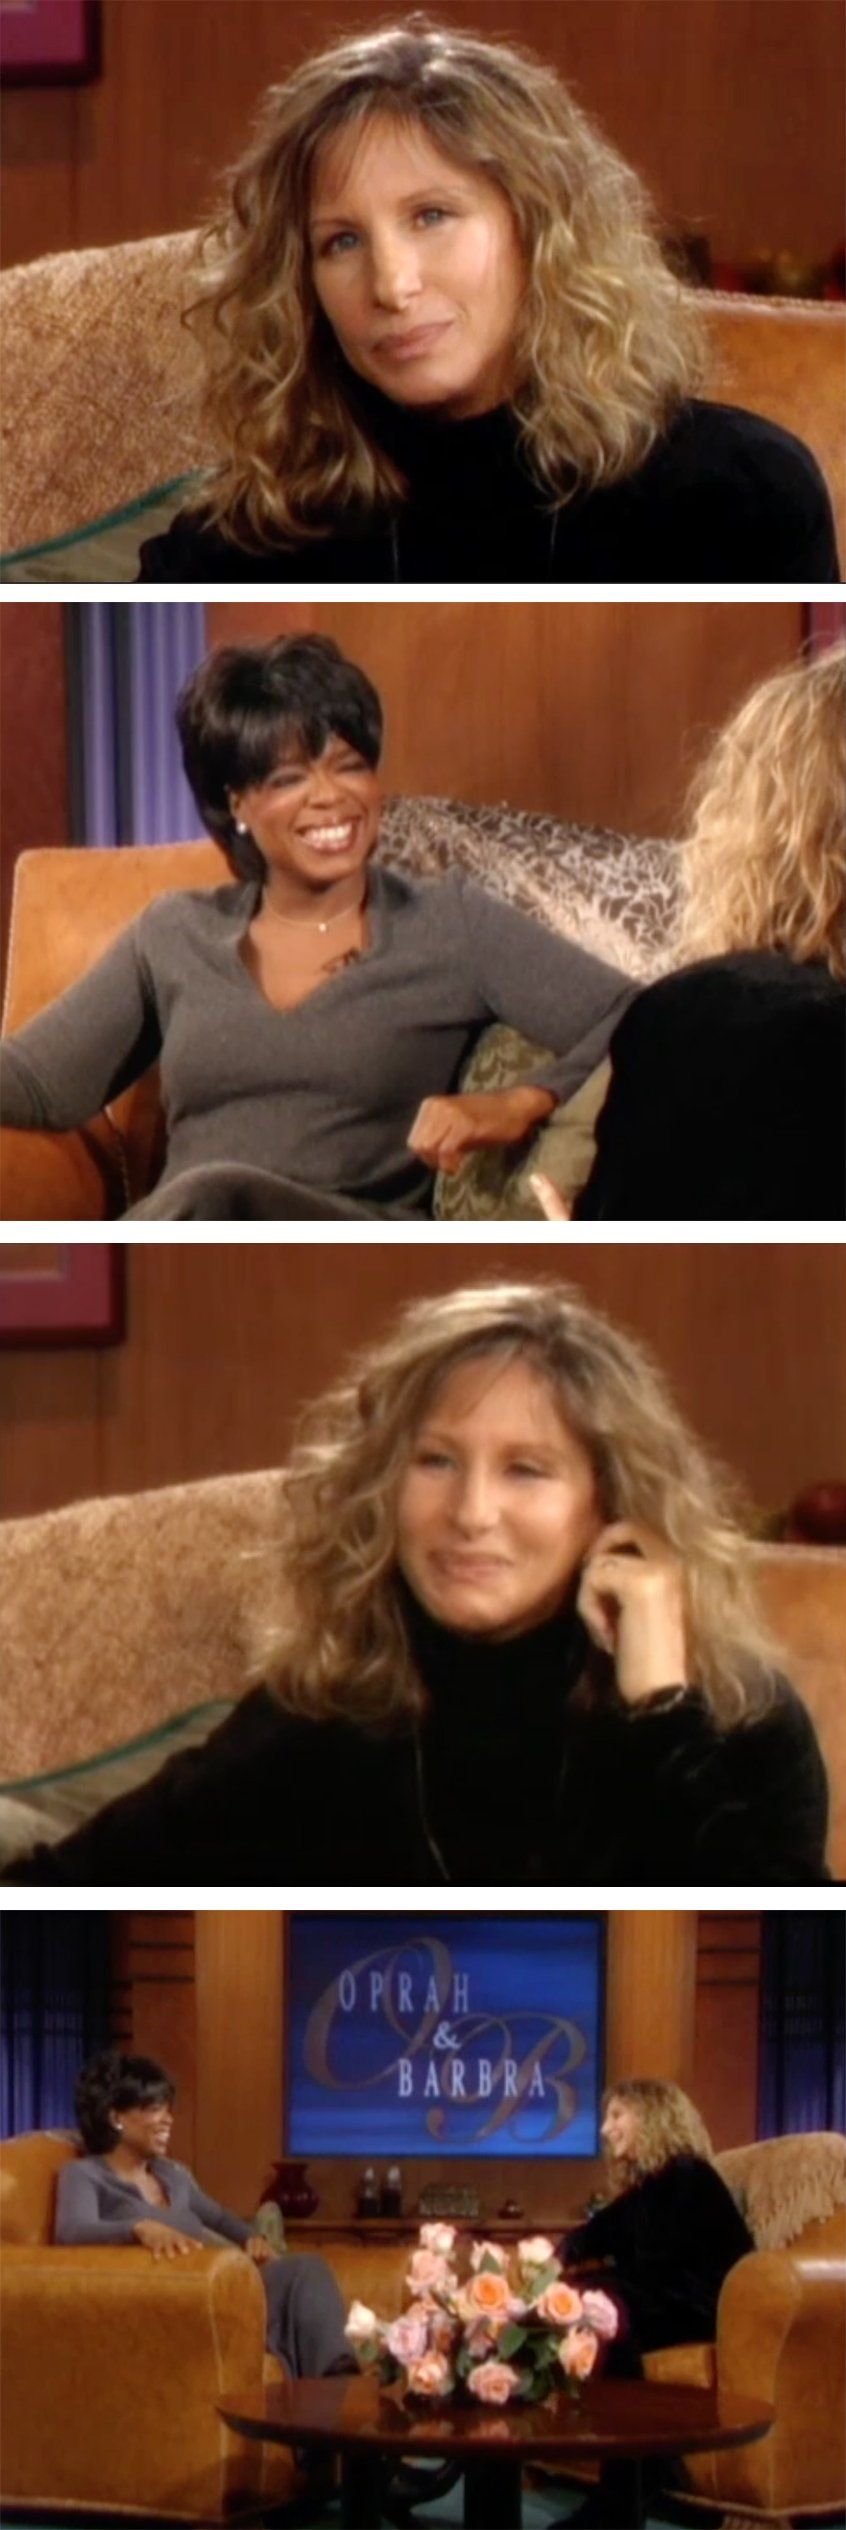 Scenes from the 1996 Oprah show.